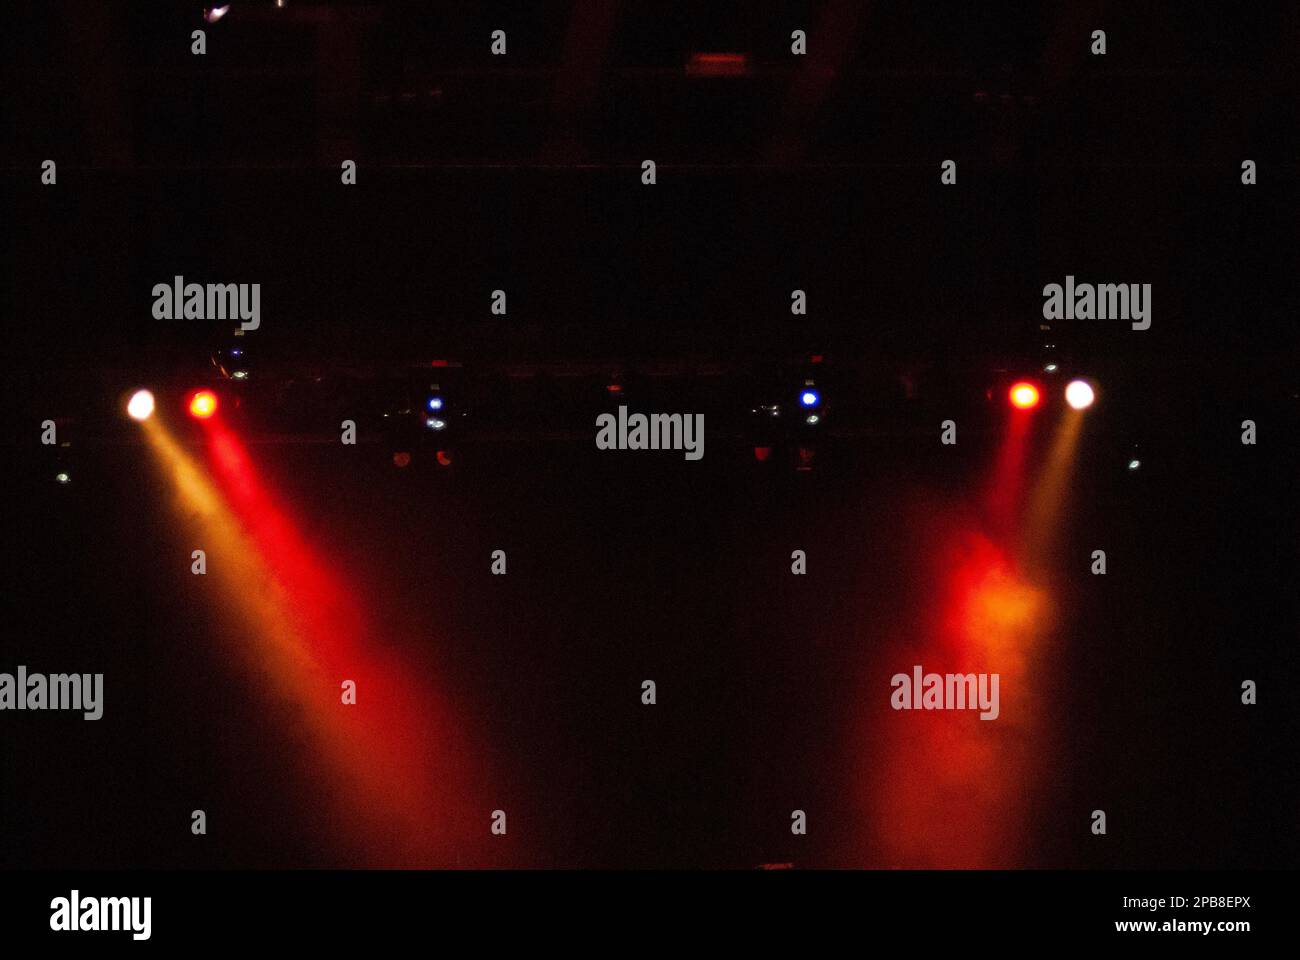 Stage lighting, concert, theater, play or live event, background, red and yellow, spotlit or spotlights Stock Photo